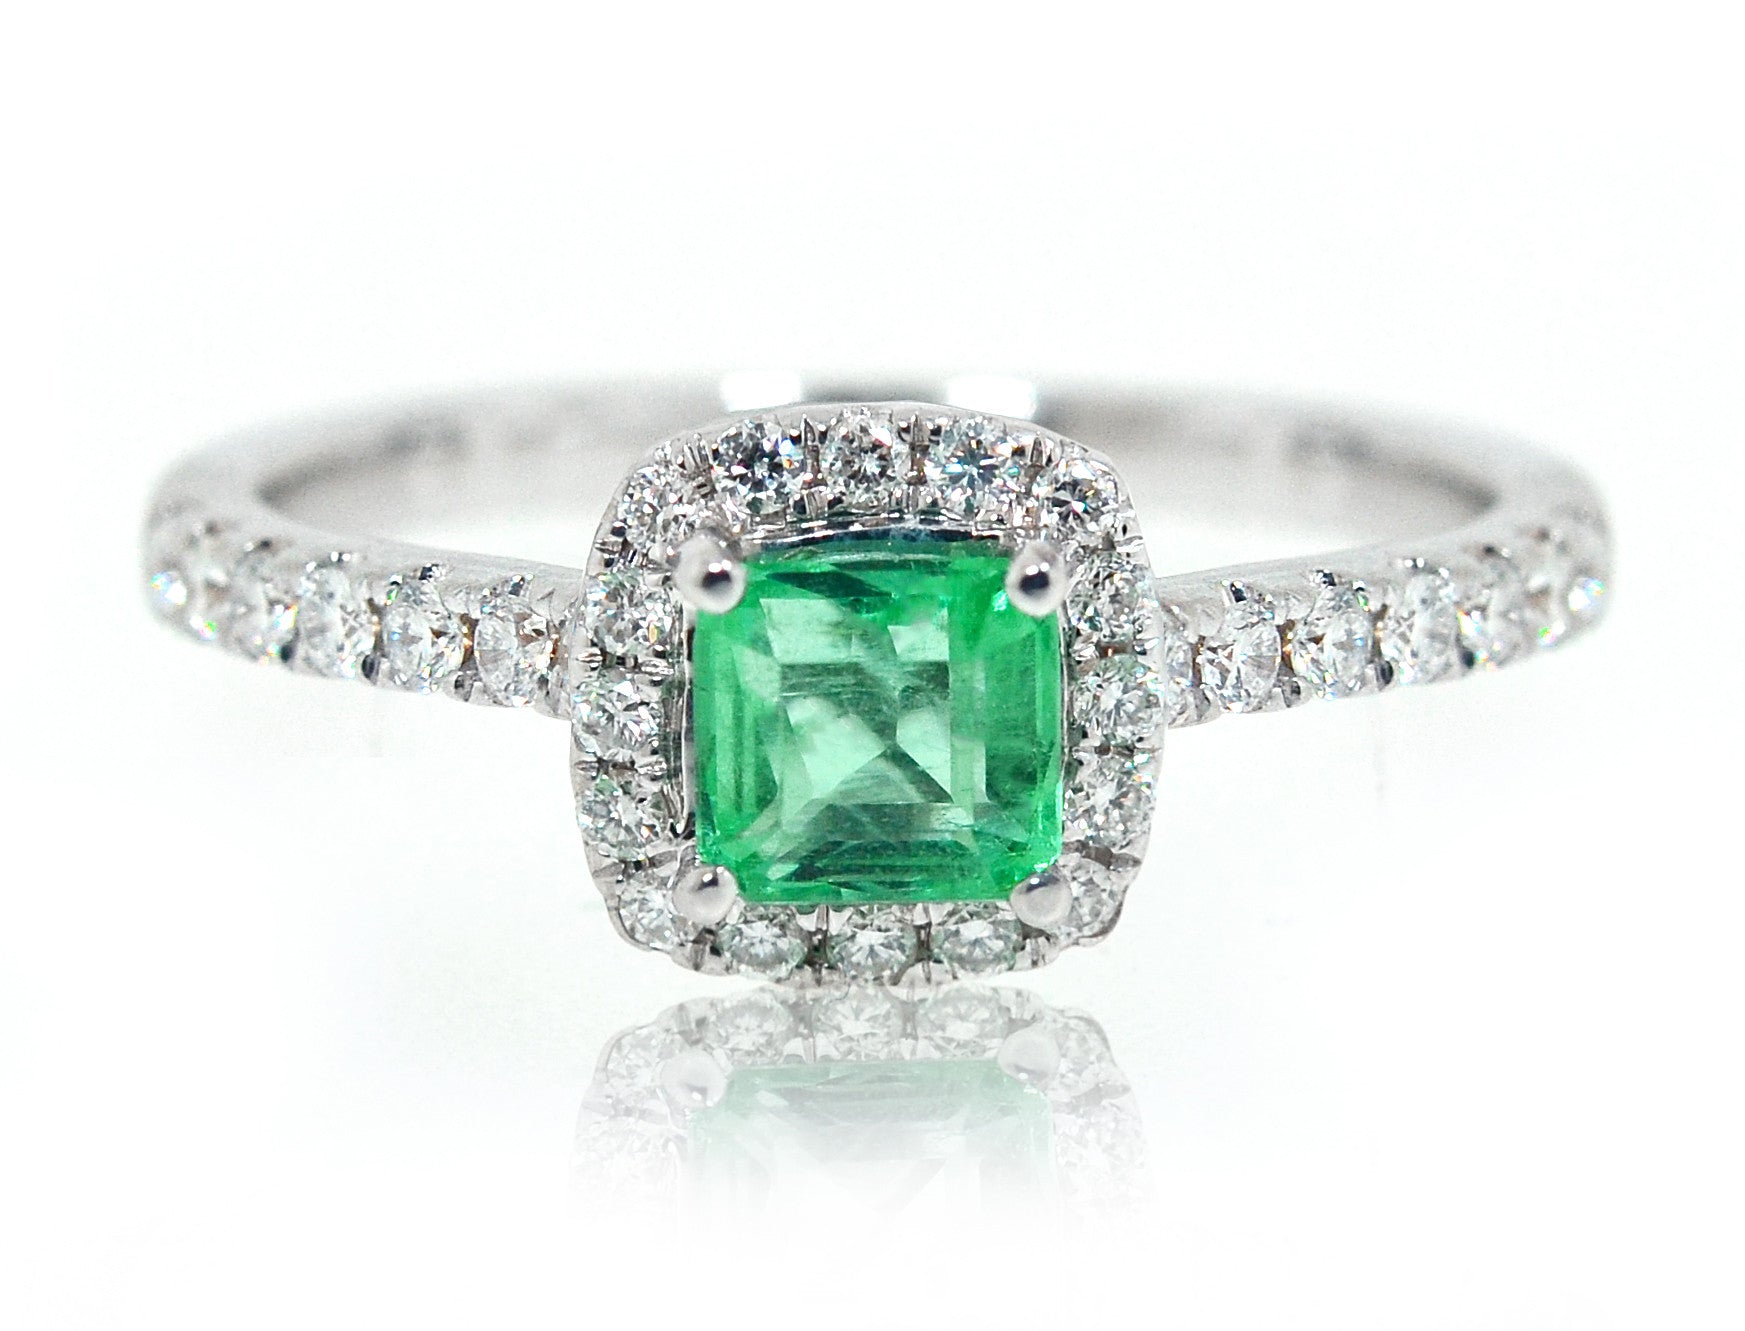 18ct White gold cushion green emerald ring with a halo of diamonds - ForeverJewels Design Studio 8